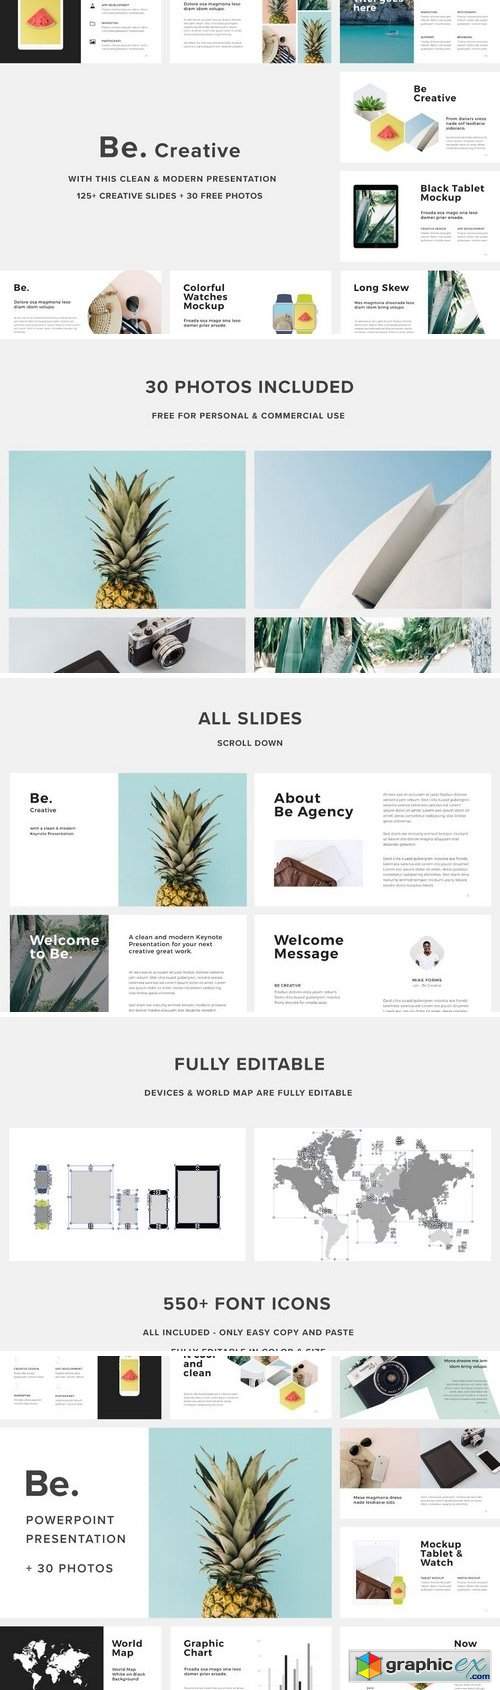 Be Powerpoint Template +30 Photos